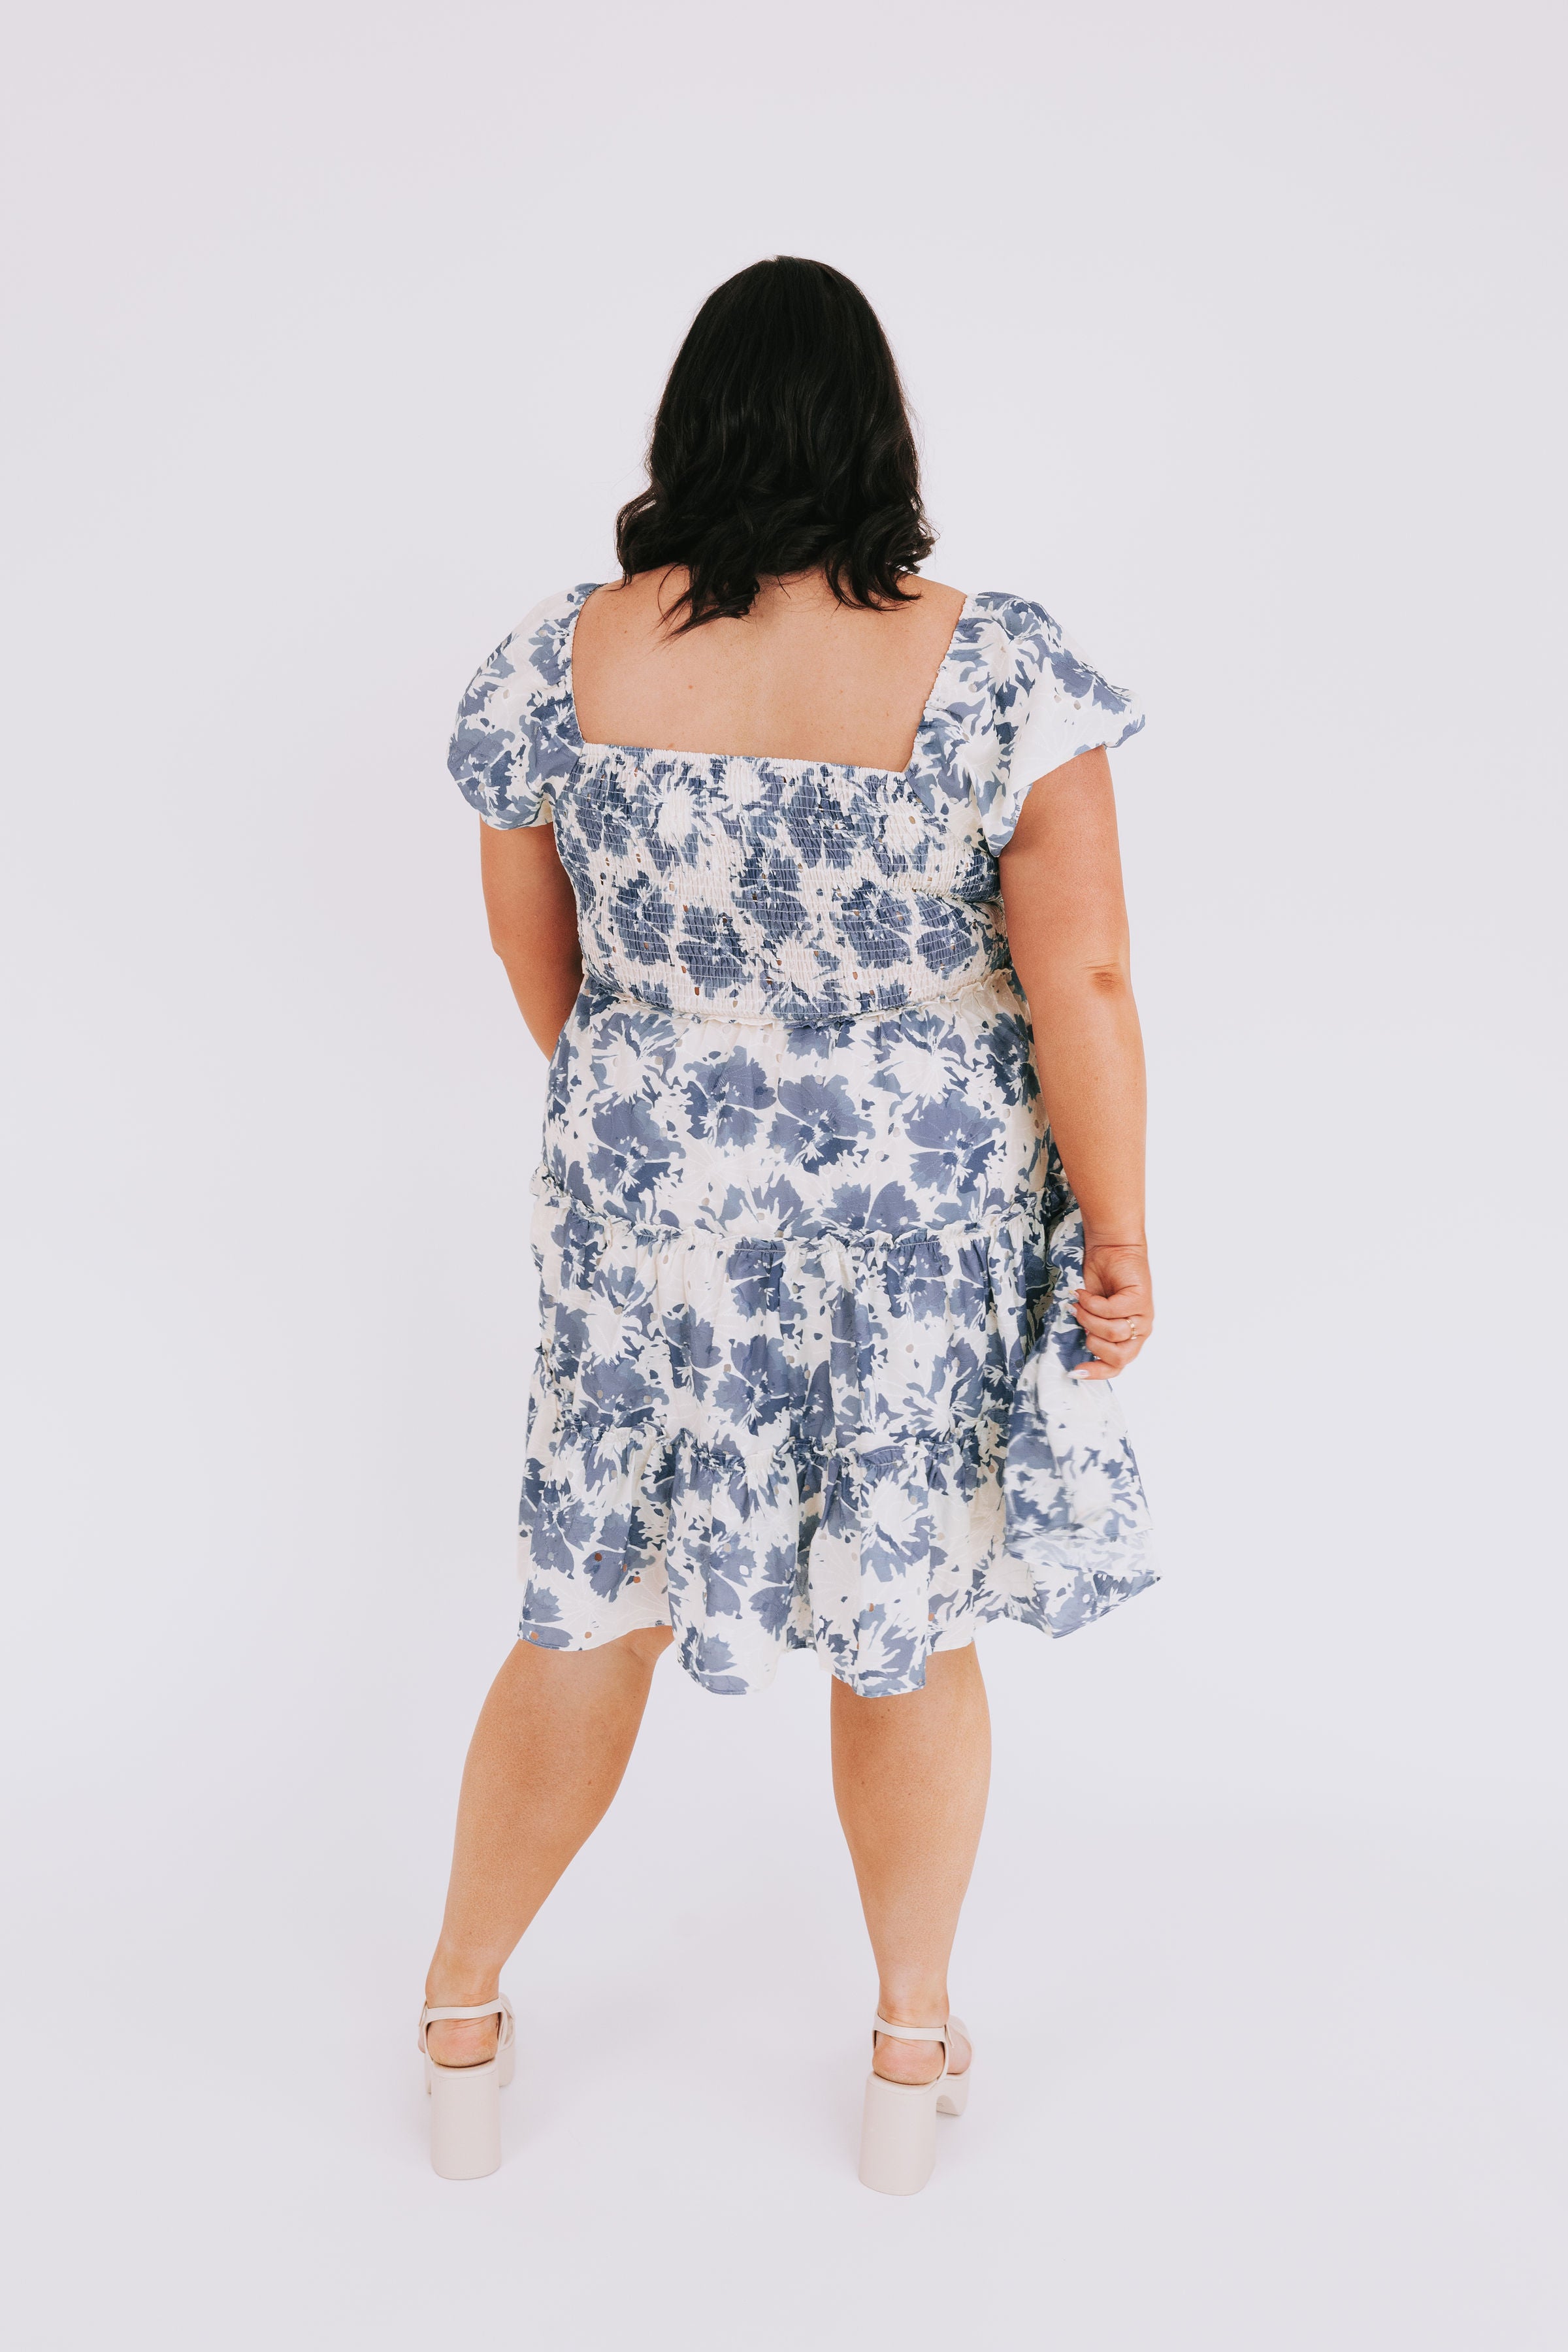 PLUS SIZE - In The Jungle Dress